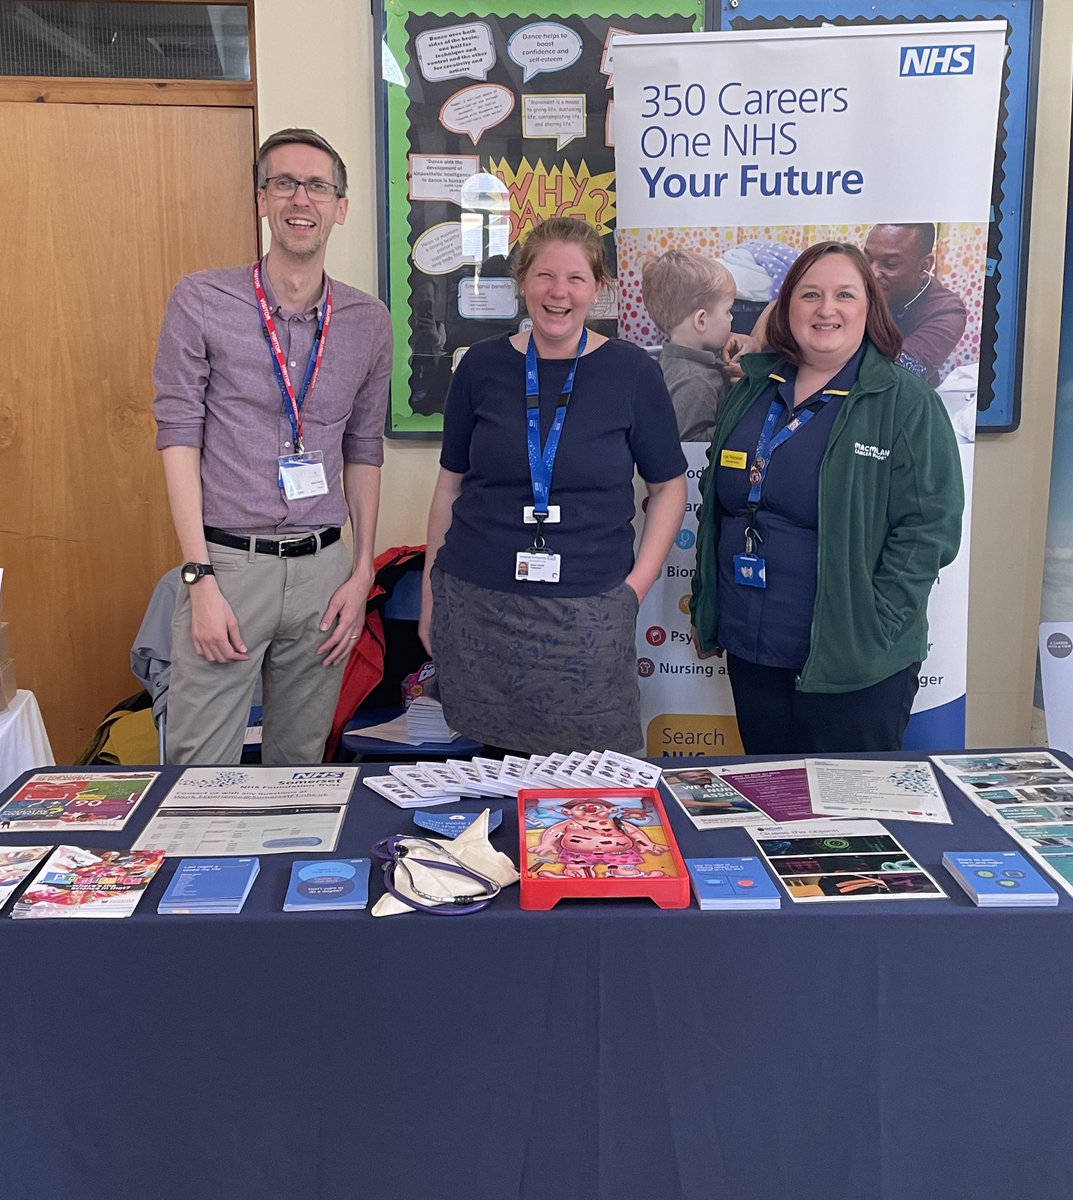 We had a great time at @BishopFoxs Careers Fair yesterday sharing our knowledge about #350NHSCareers!

Thanks to Mark, Helen, and Lisa for their support. Hopefully we inspired some future podiatrists and nurses!

@SomersetFT @somNHS_LD @somersetahps